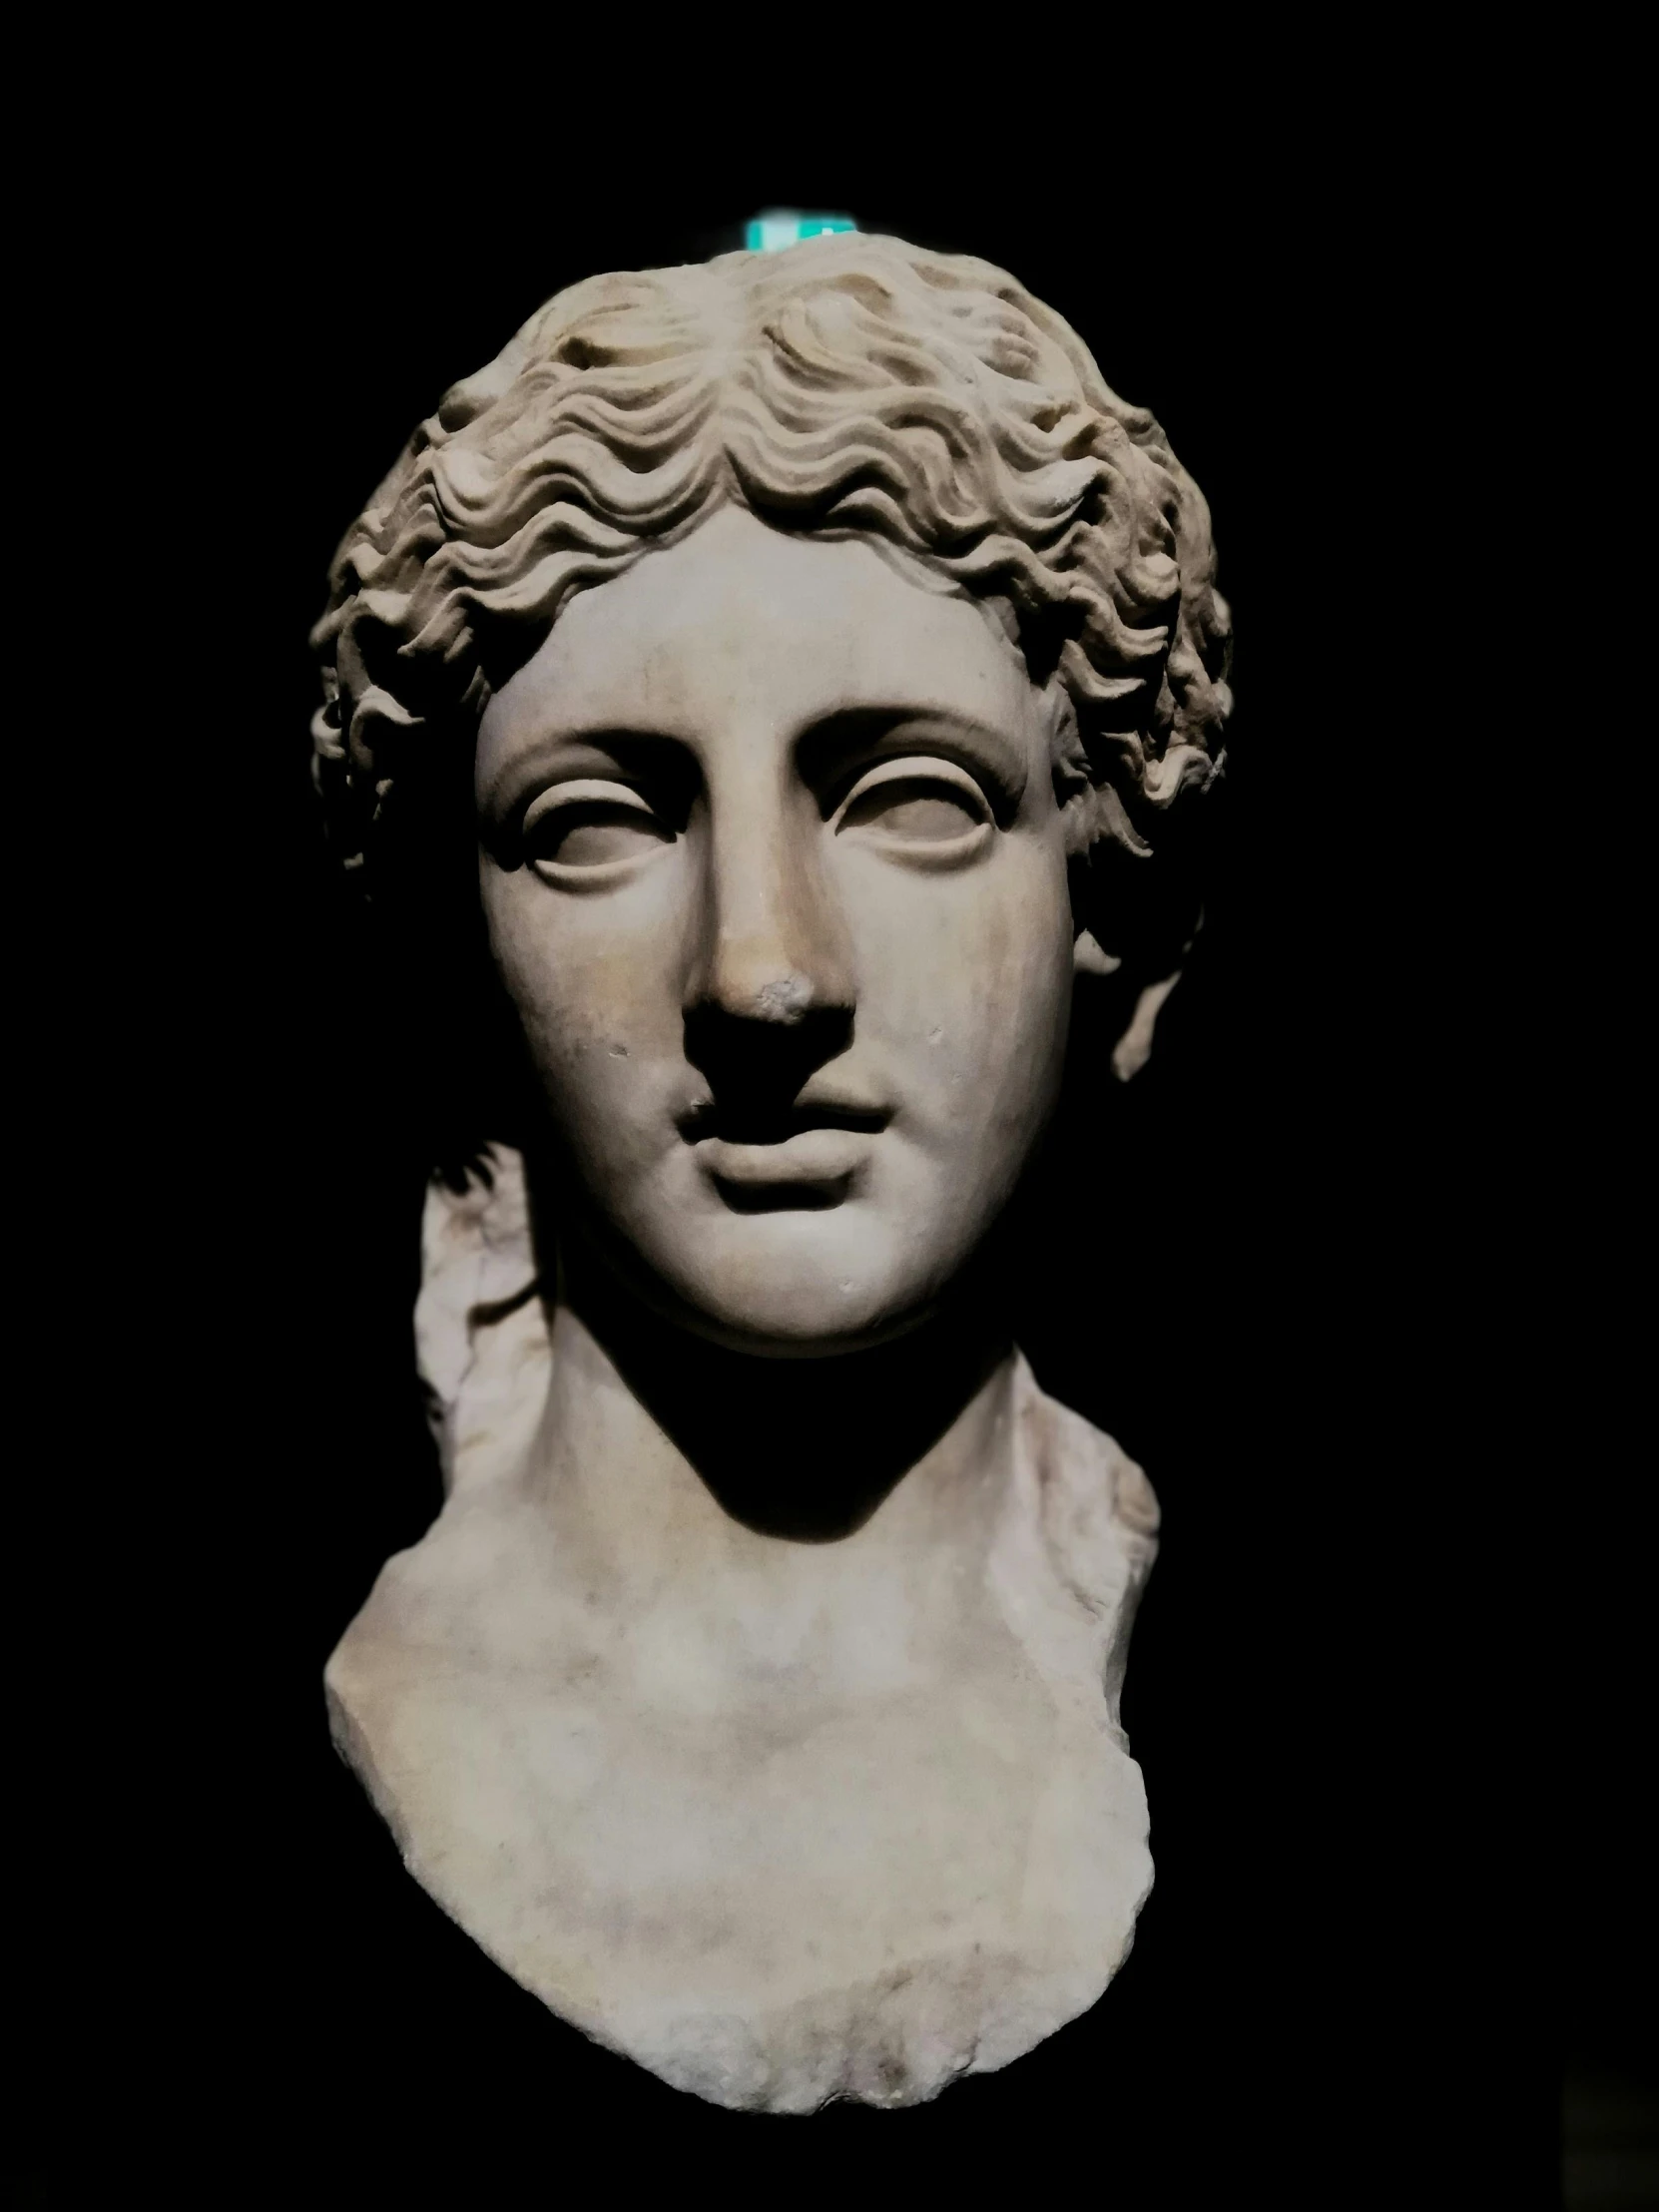 the marble bust of a woman with an intricate hairtyle is shown in front of a black background